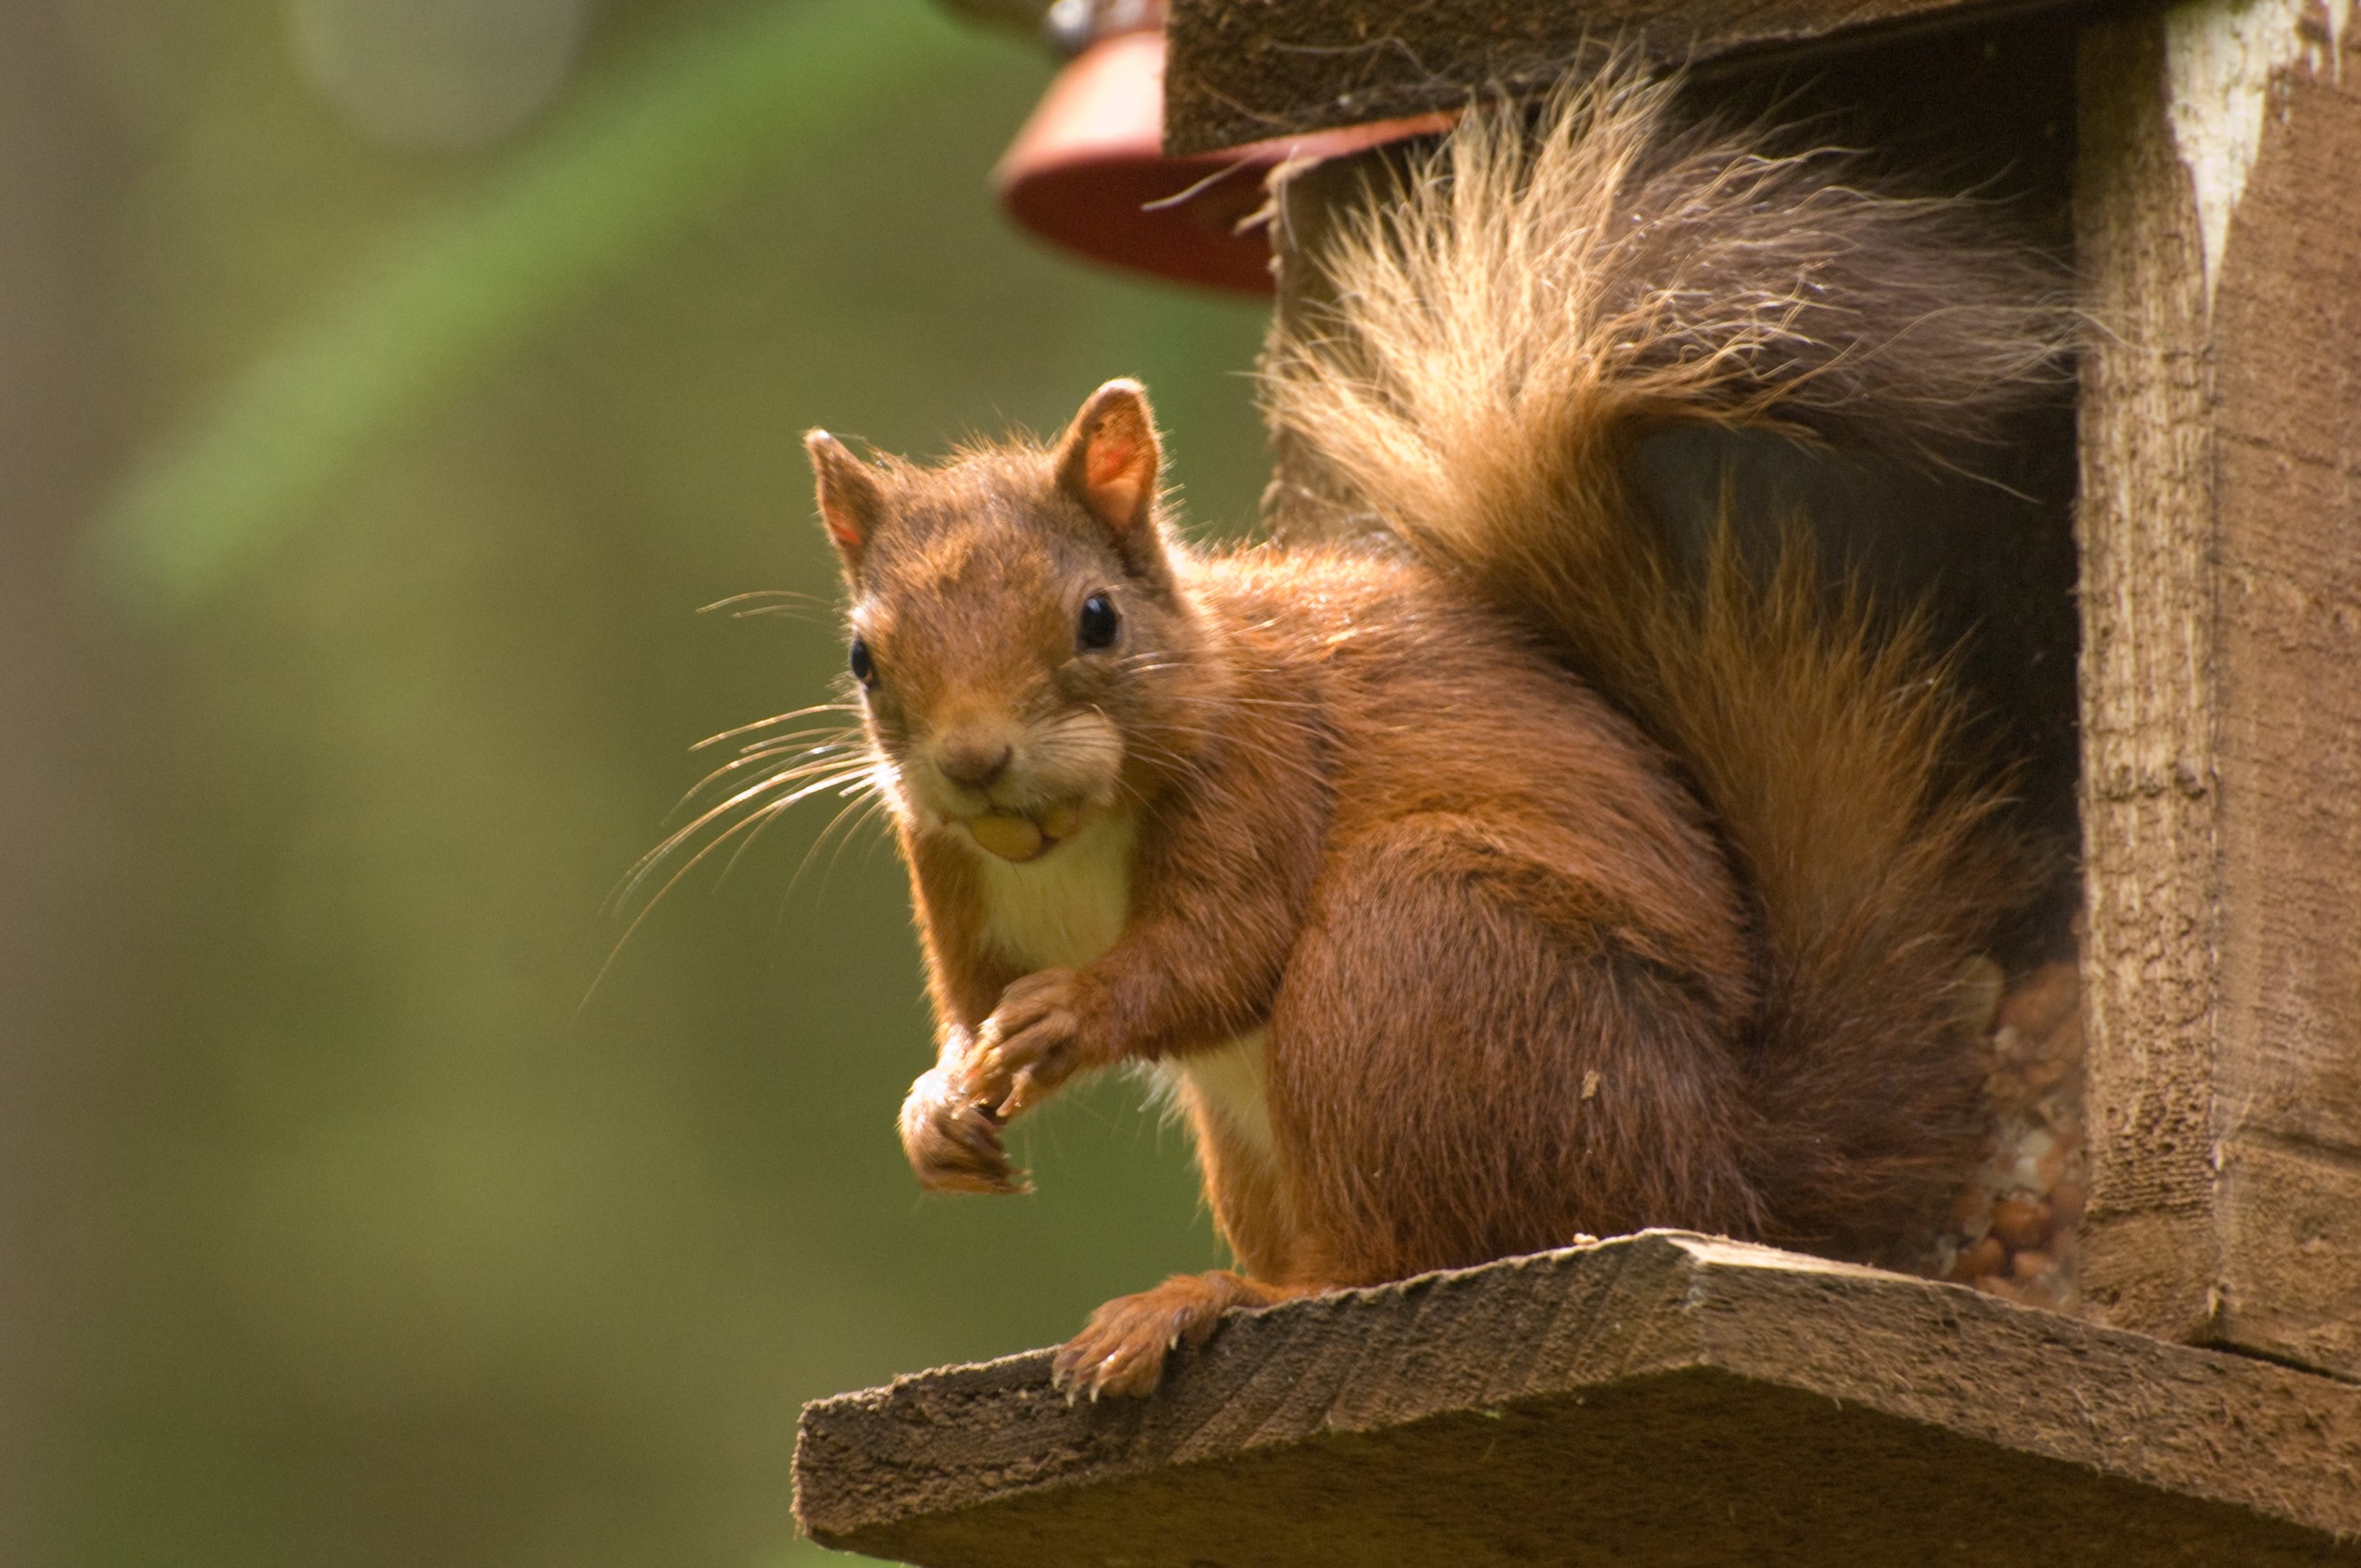 Red squirrel with nut in mouth standing on man made platform